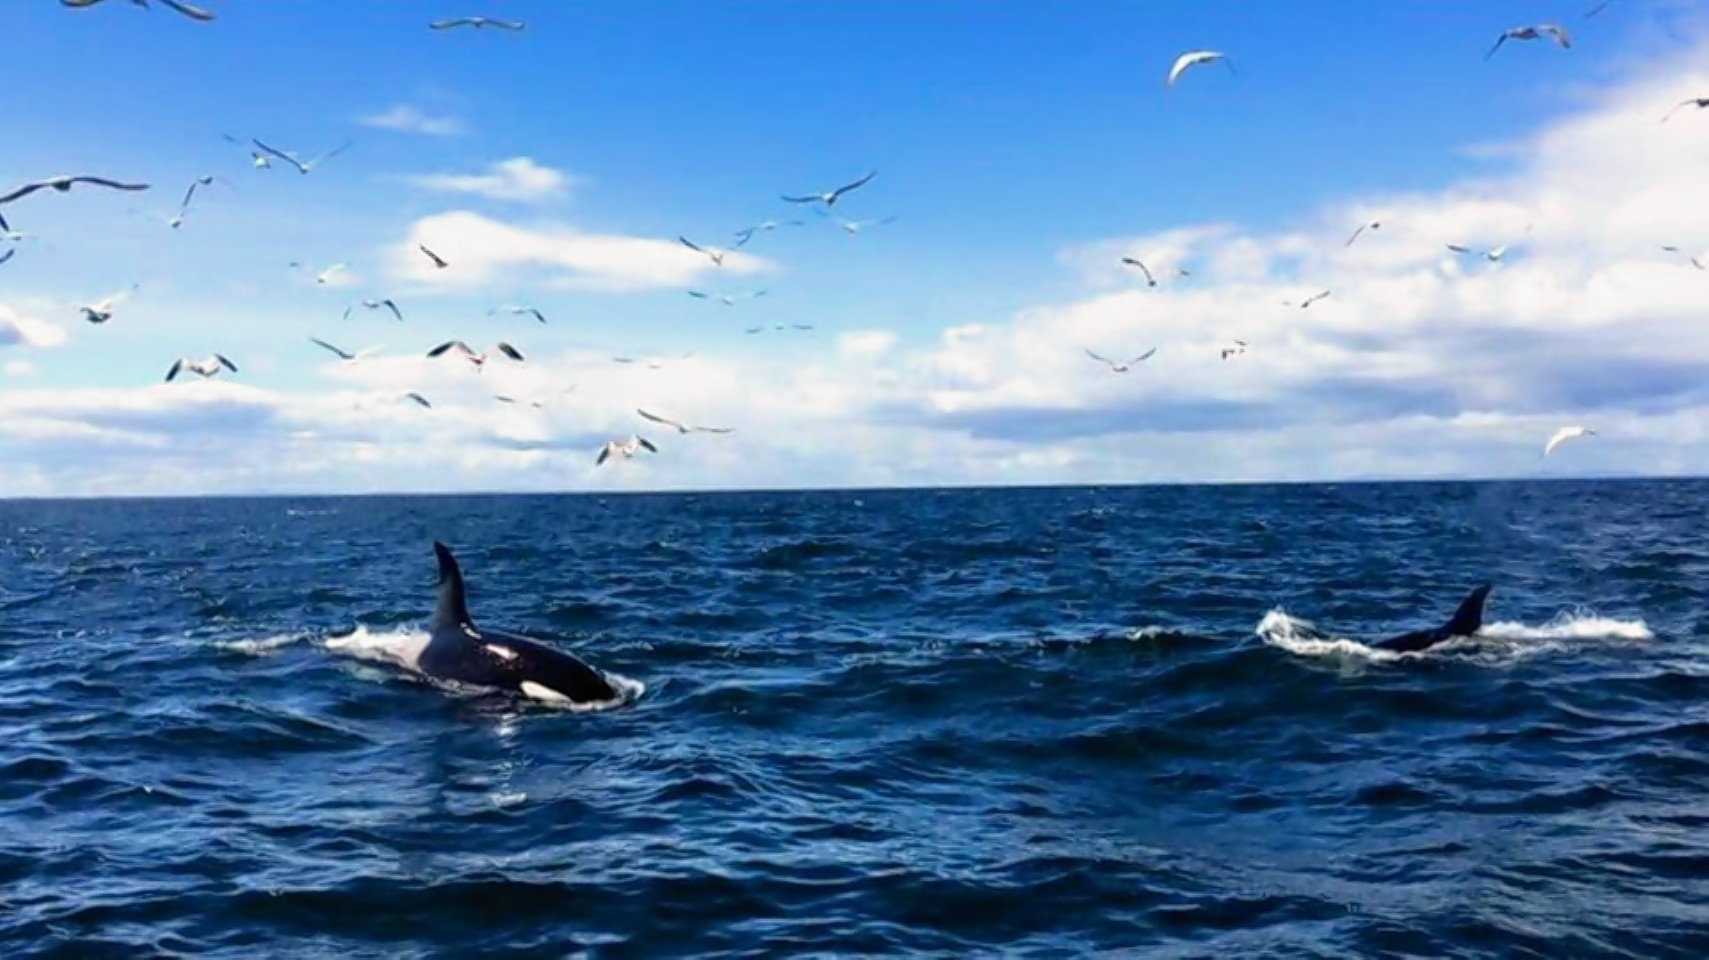 The killer whales were spotted off Portknockie